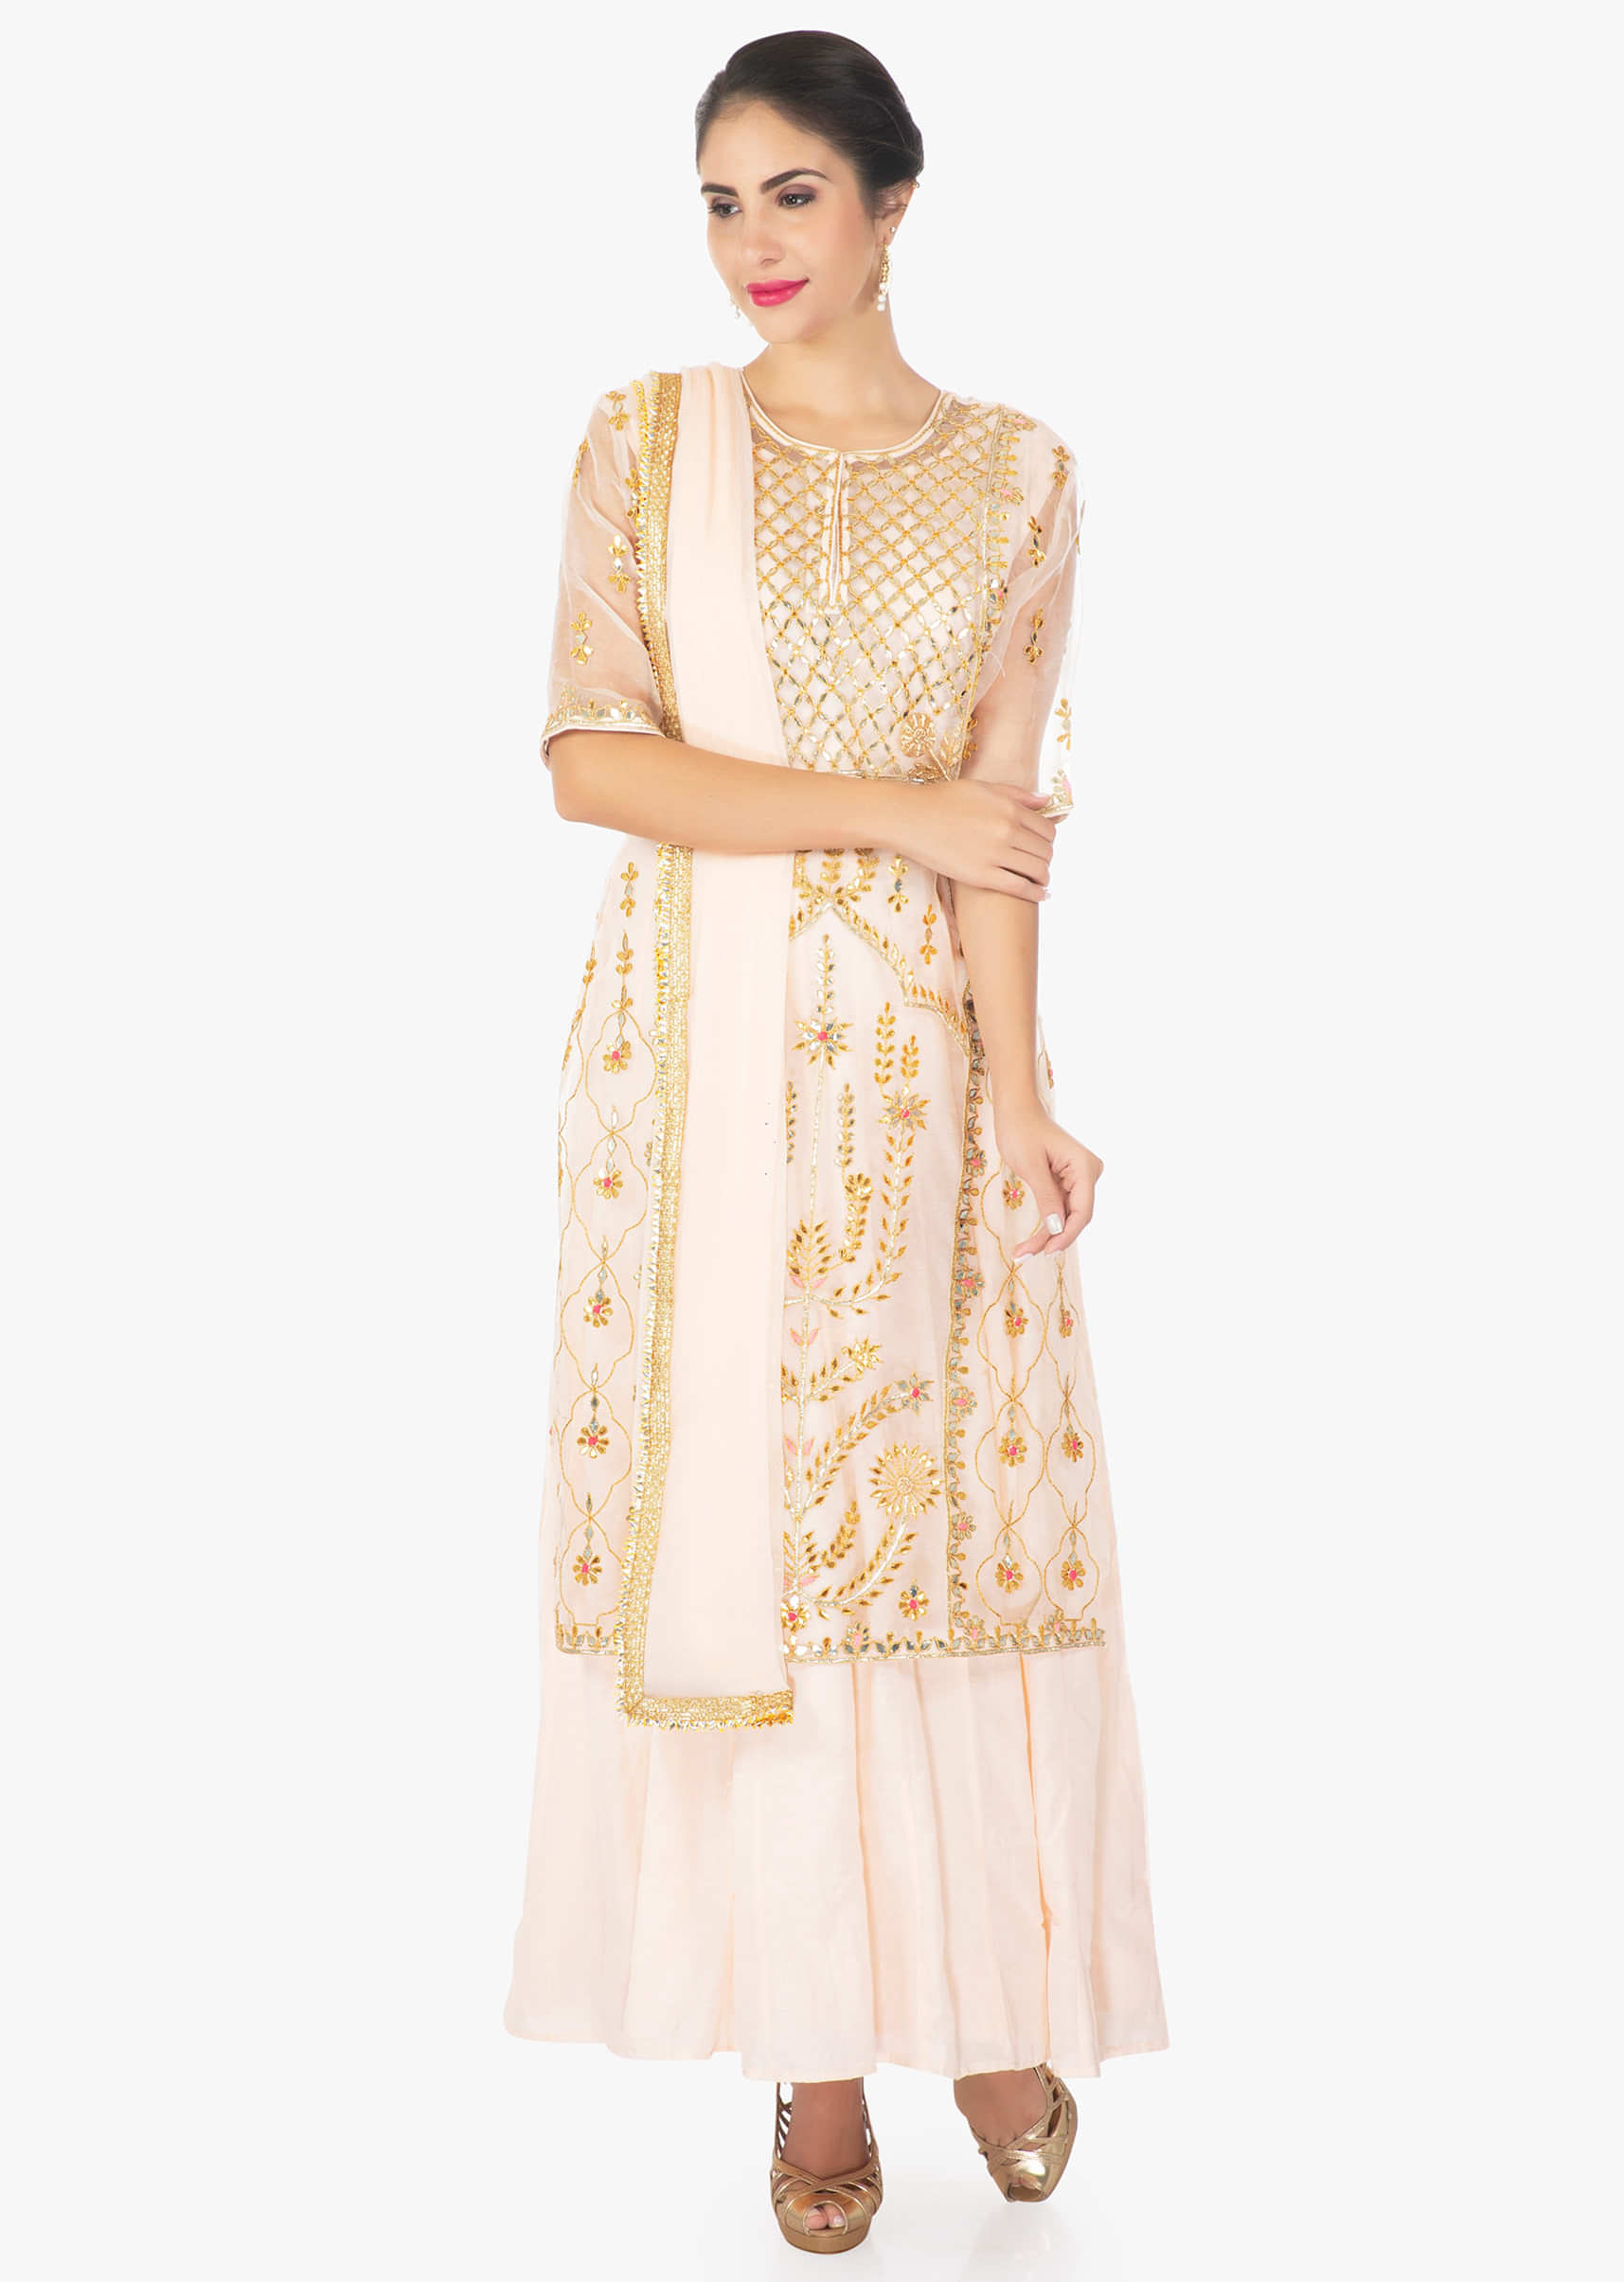 Light peach organza silk top matched with cotton inner and chiffon dupatta